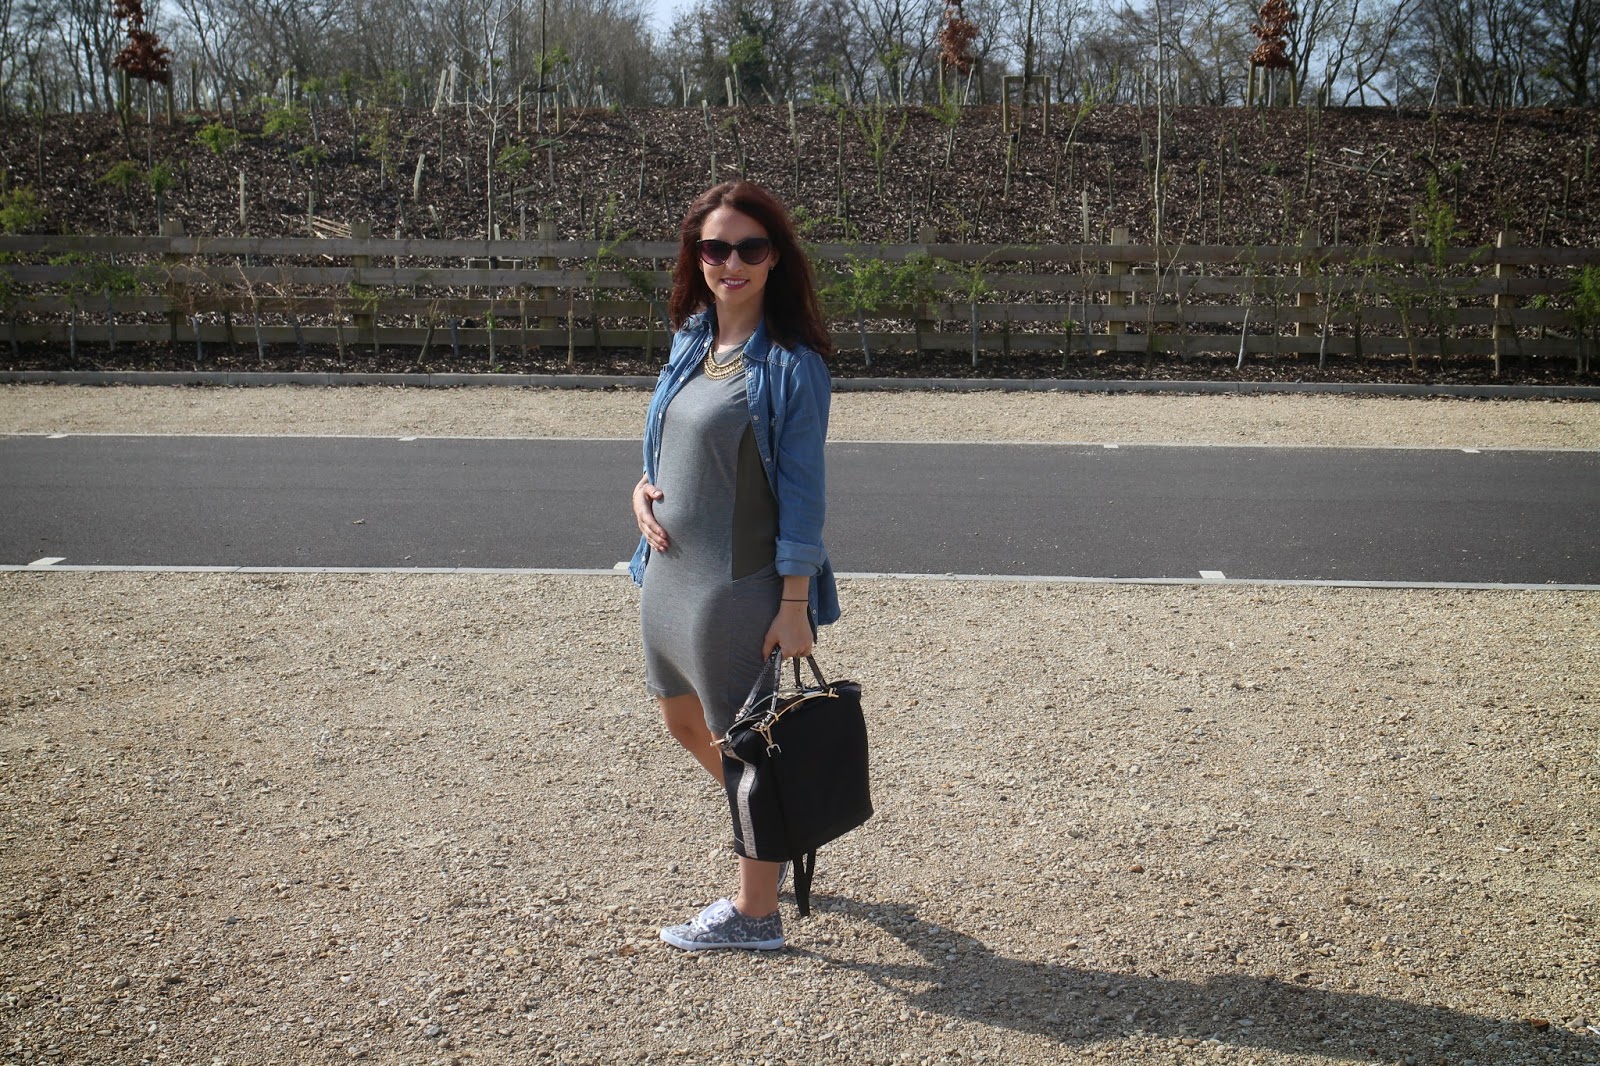 Maternity wear, Maternity street style, street style, fashion, all saints, fbloggers, casual ootd, outfit inspiration, topshop, what to wear when pregnant, fashion style